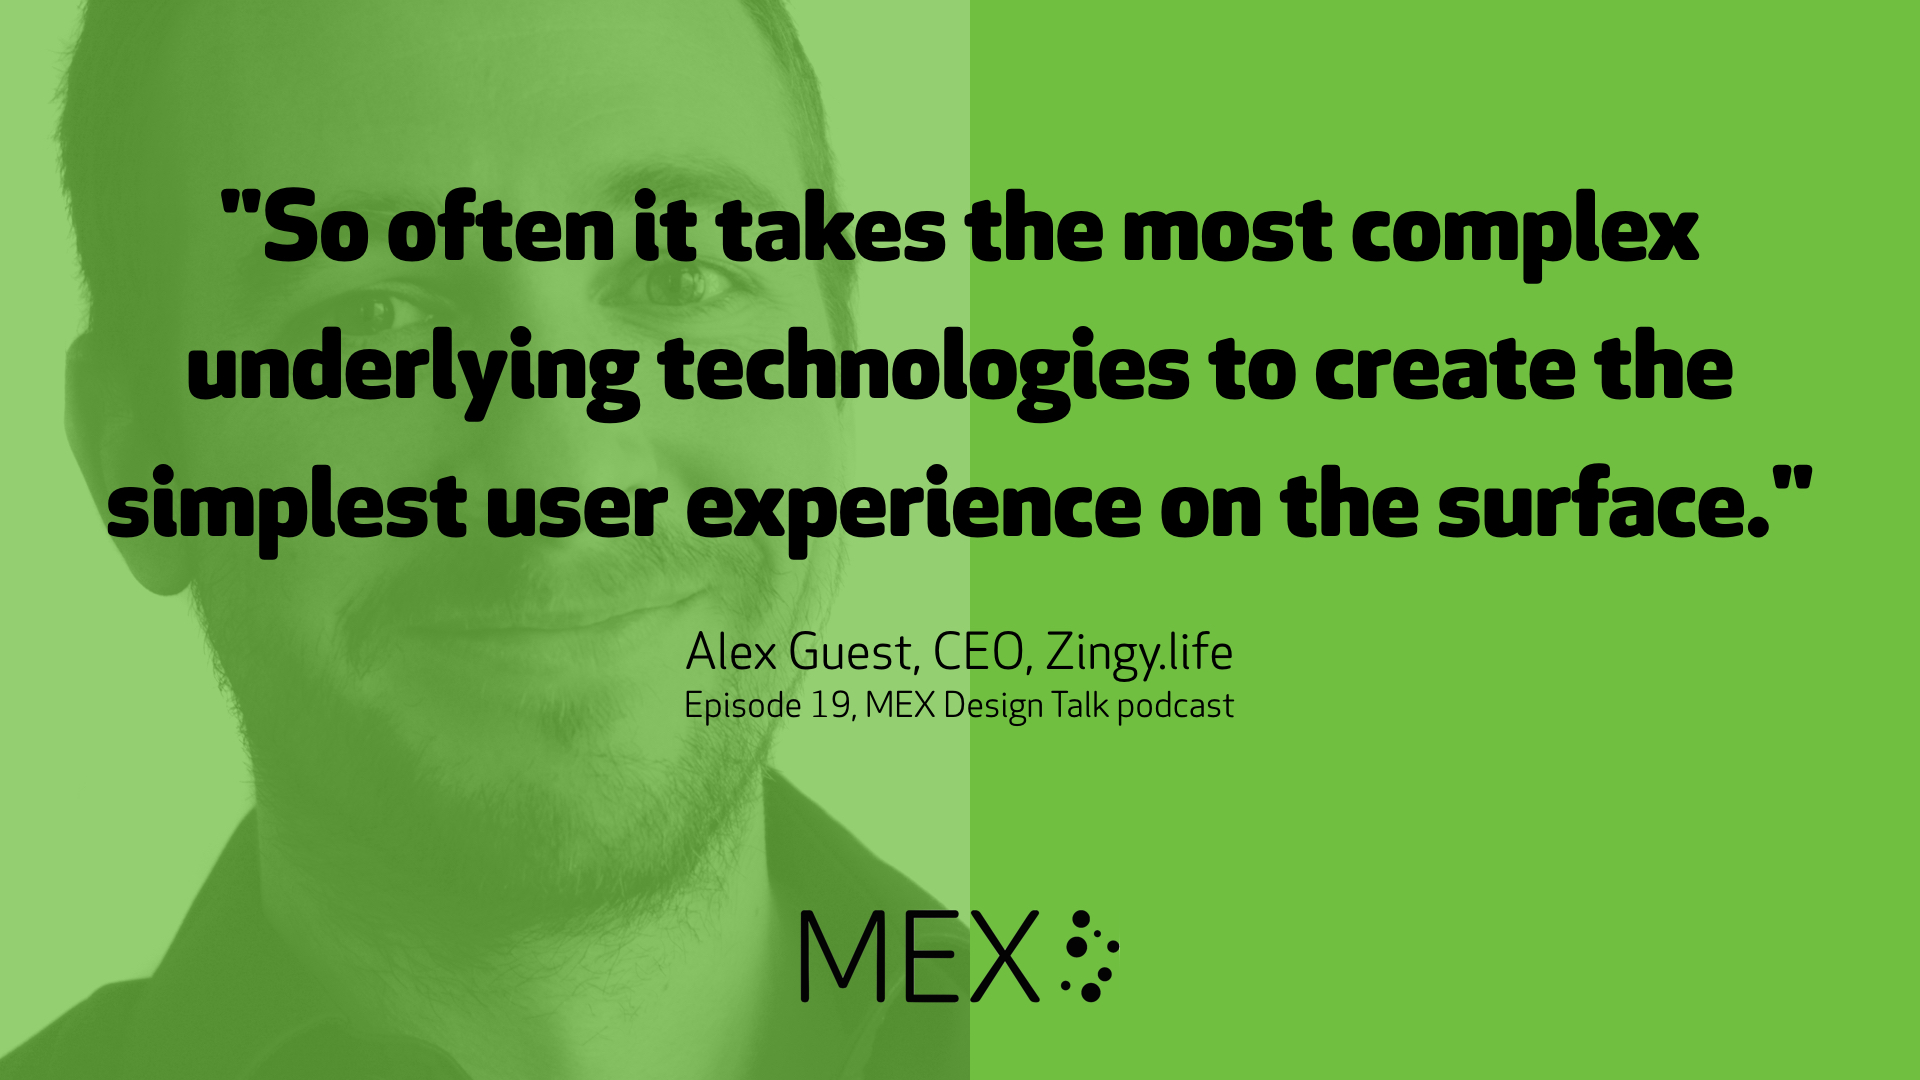 "So often it takes the most complex underlying technologies to create the simplest user experience on the surface." -- Alex Guest, CEO, Zingy.life, Episode 19, MEX Design Talk podcast